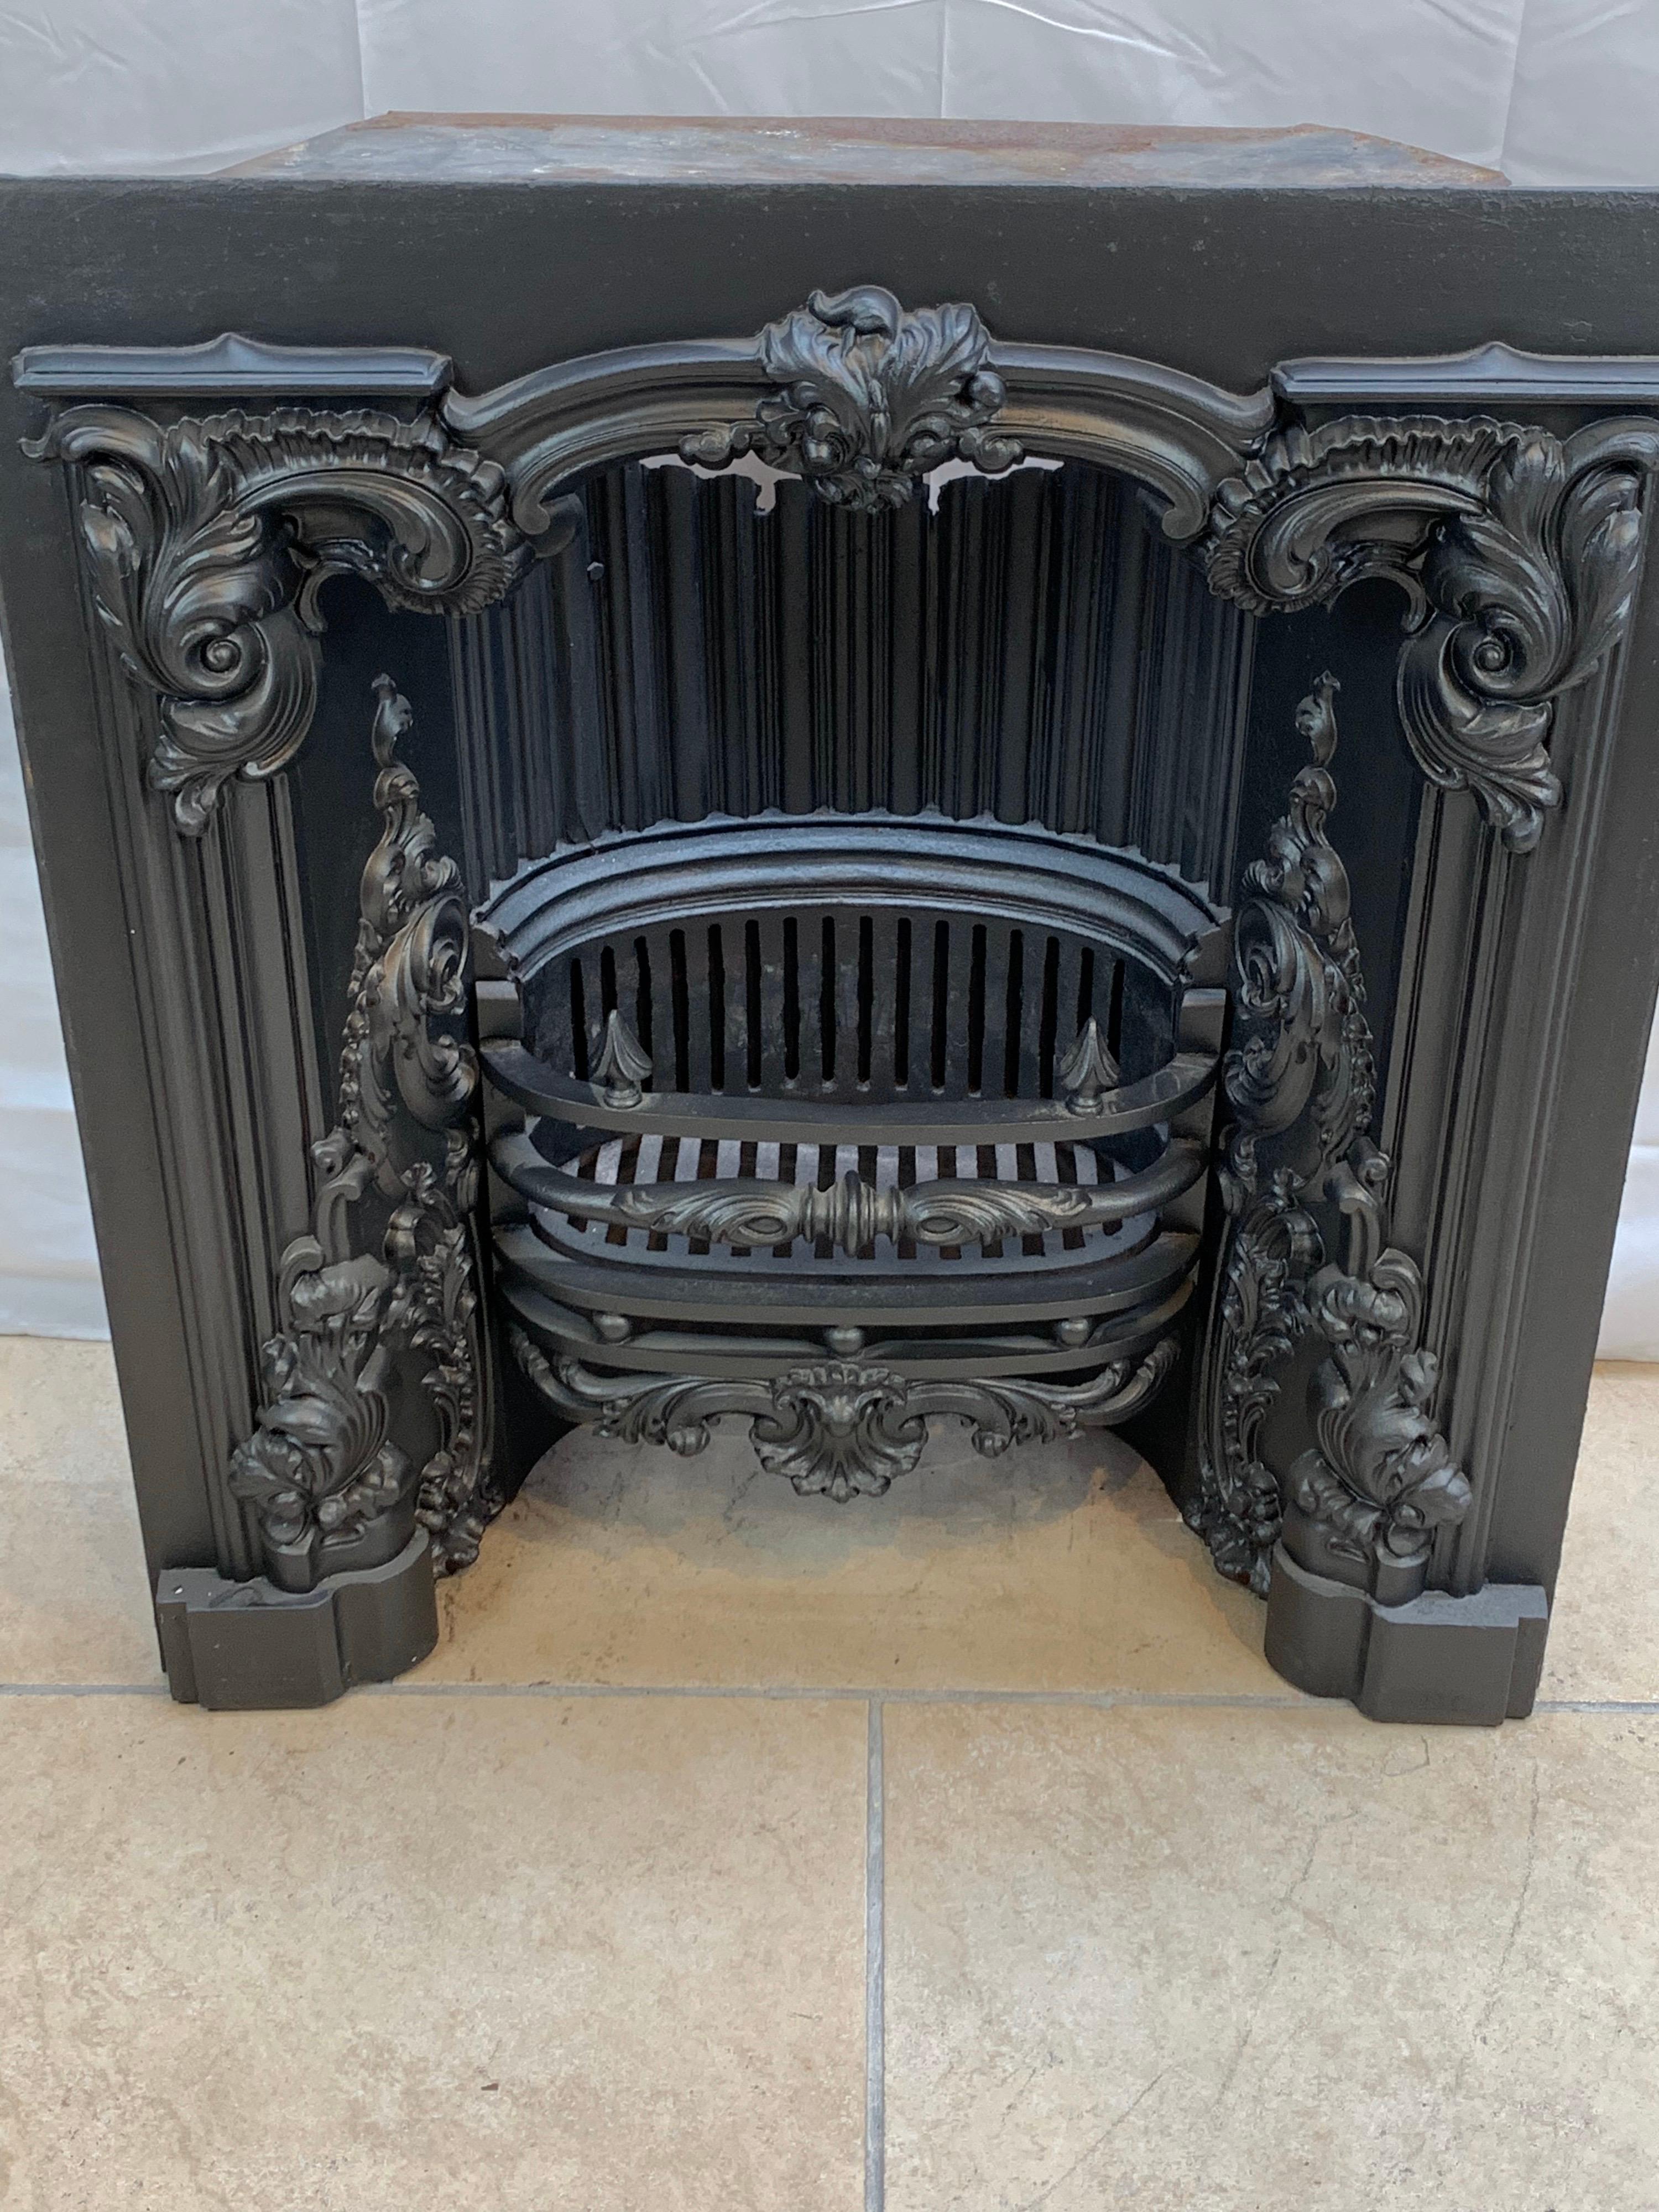 A very good quality Georgian cast iron fireplace hob grate insert. 
Made by the famous Carron foundry.